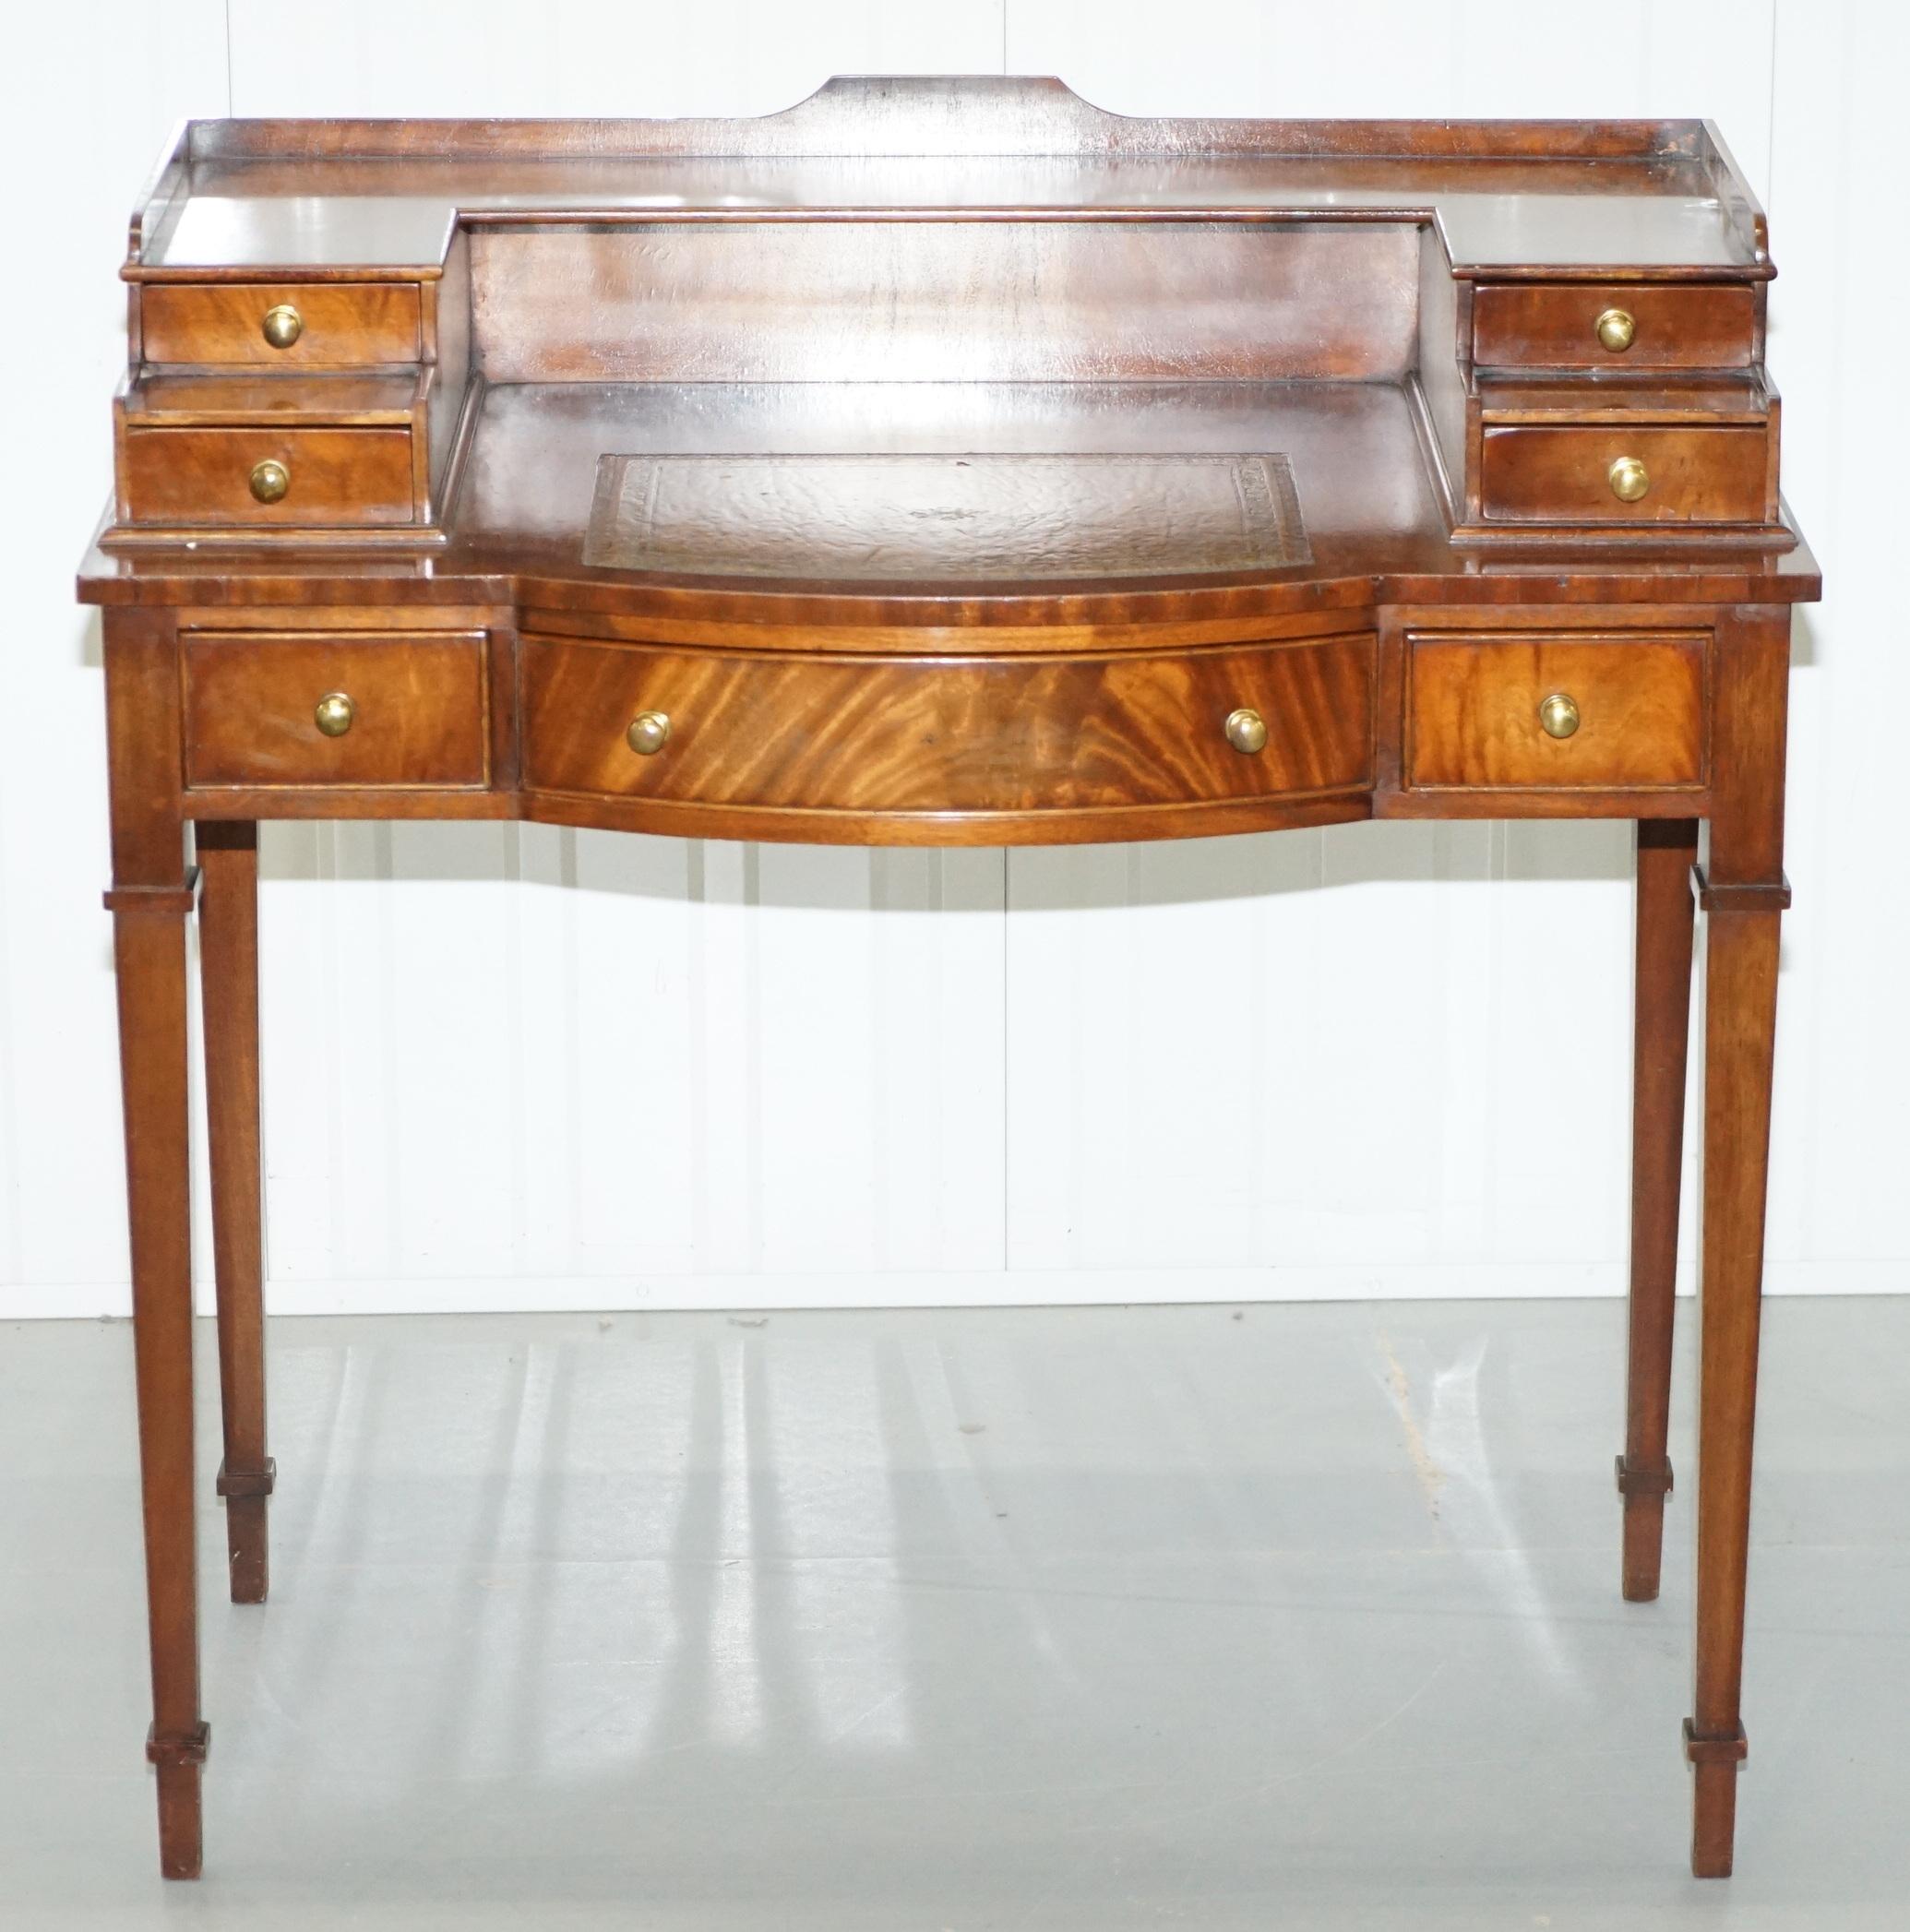 We are delighted to offer for sale this stunning RRP £2500 Bevan Funnel light mahogany desk with leather writing surface

A well-made piece of furniture that looks amazing from every angle, there’s lots of drawers so great for storage, it's not